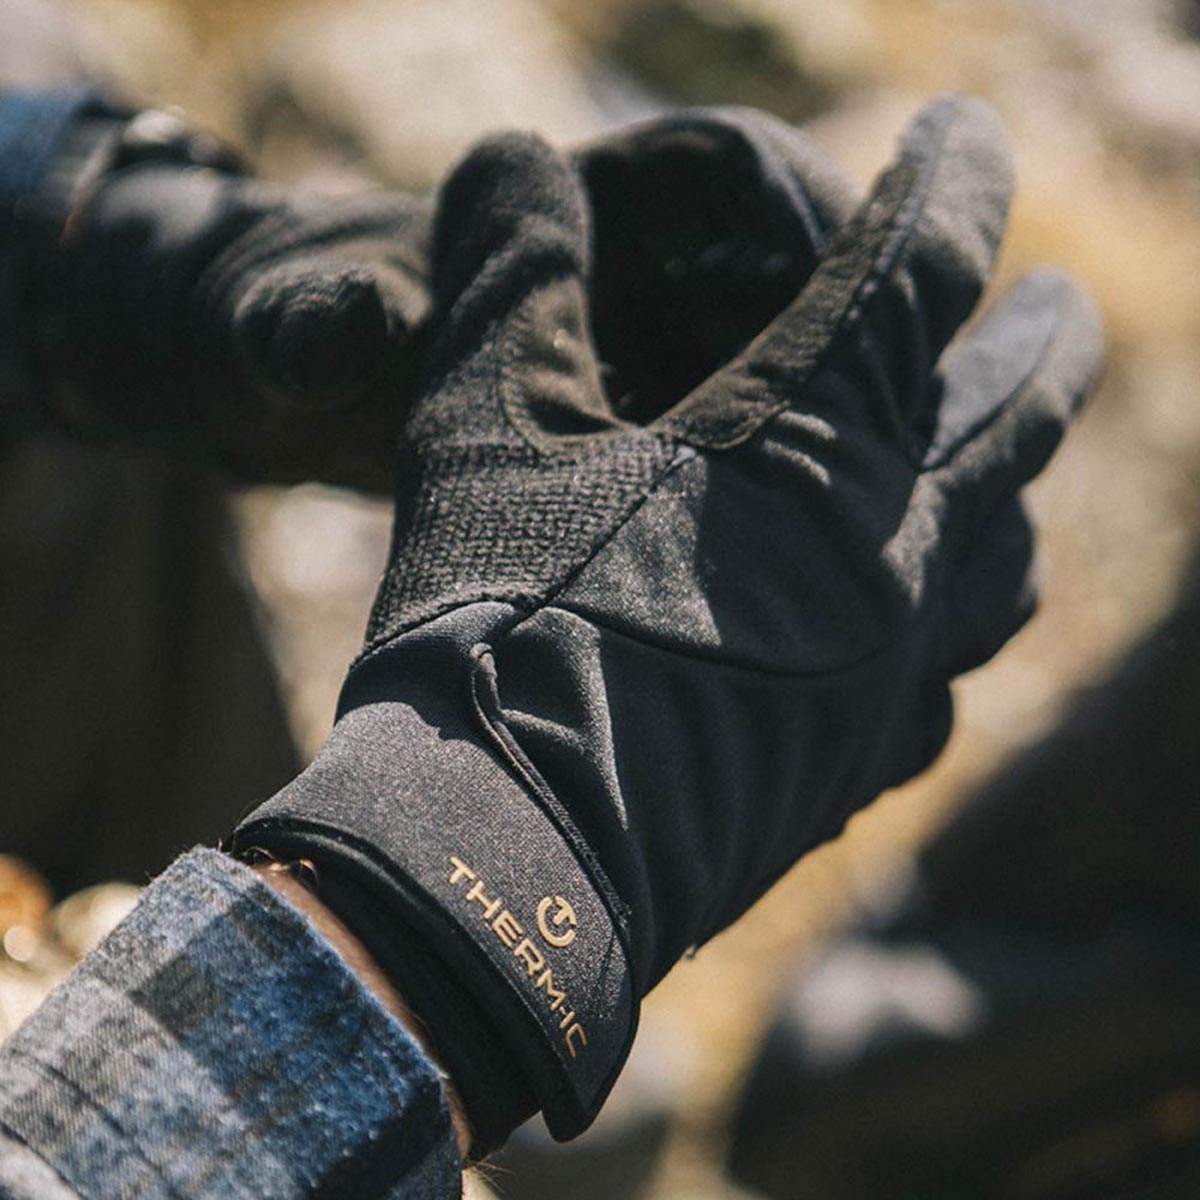 THERM-IC - NORDIC EXPLORATION GLOVES